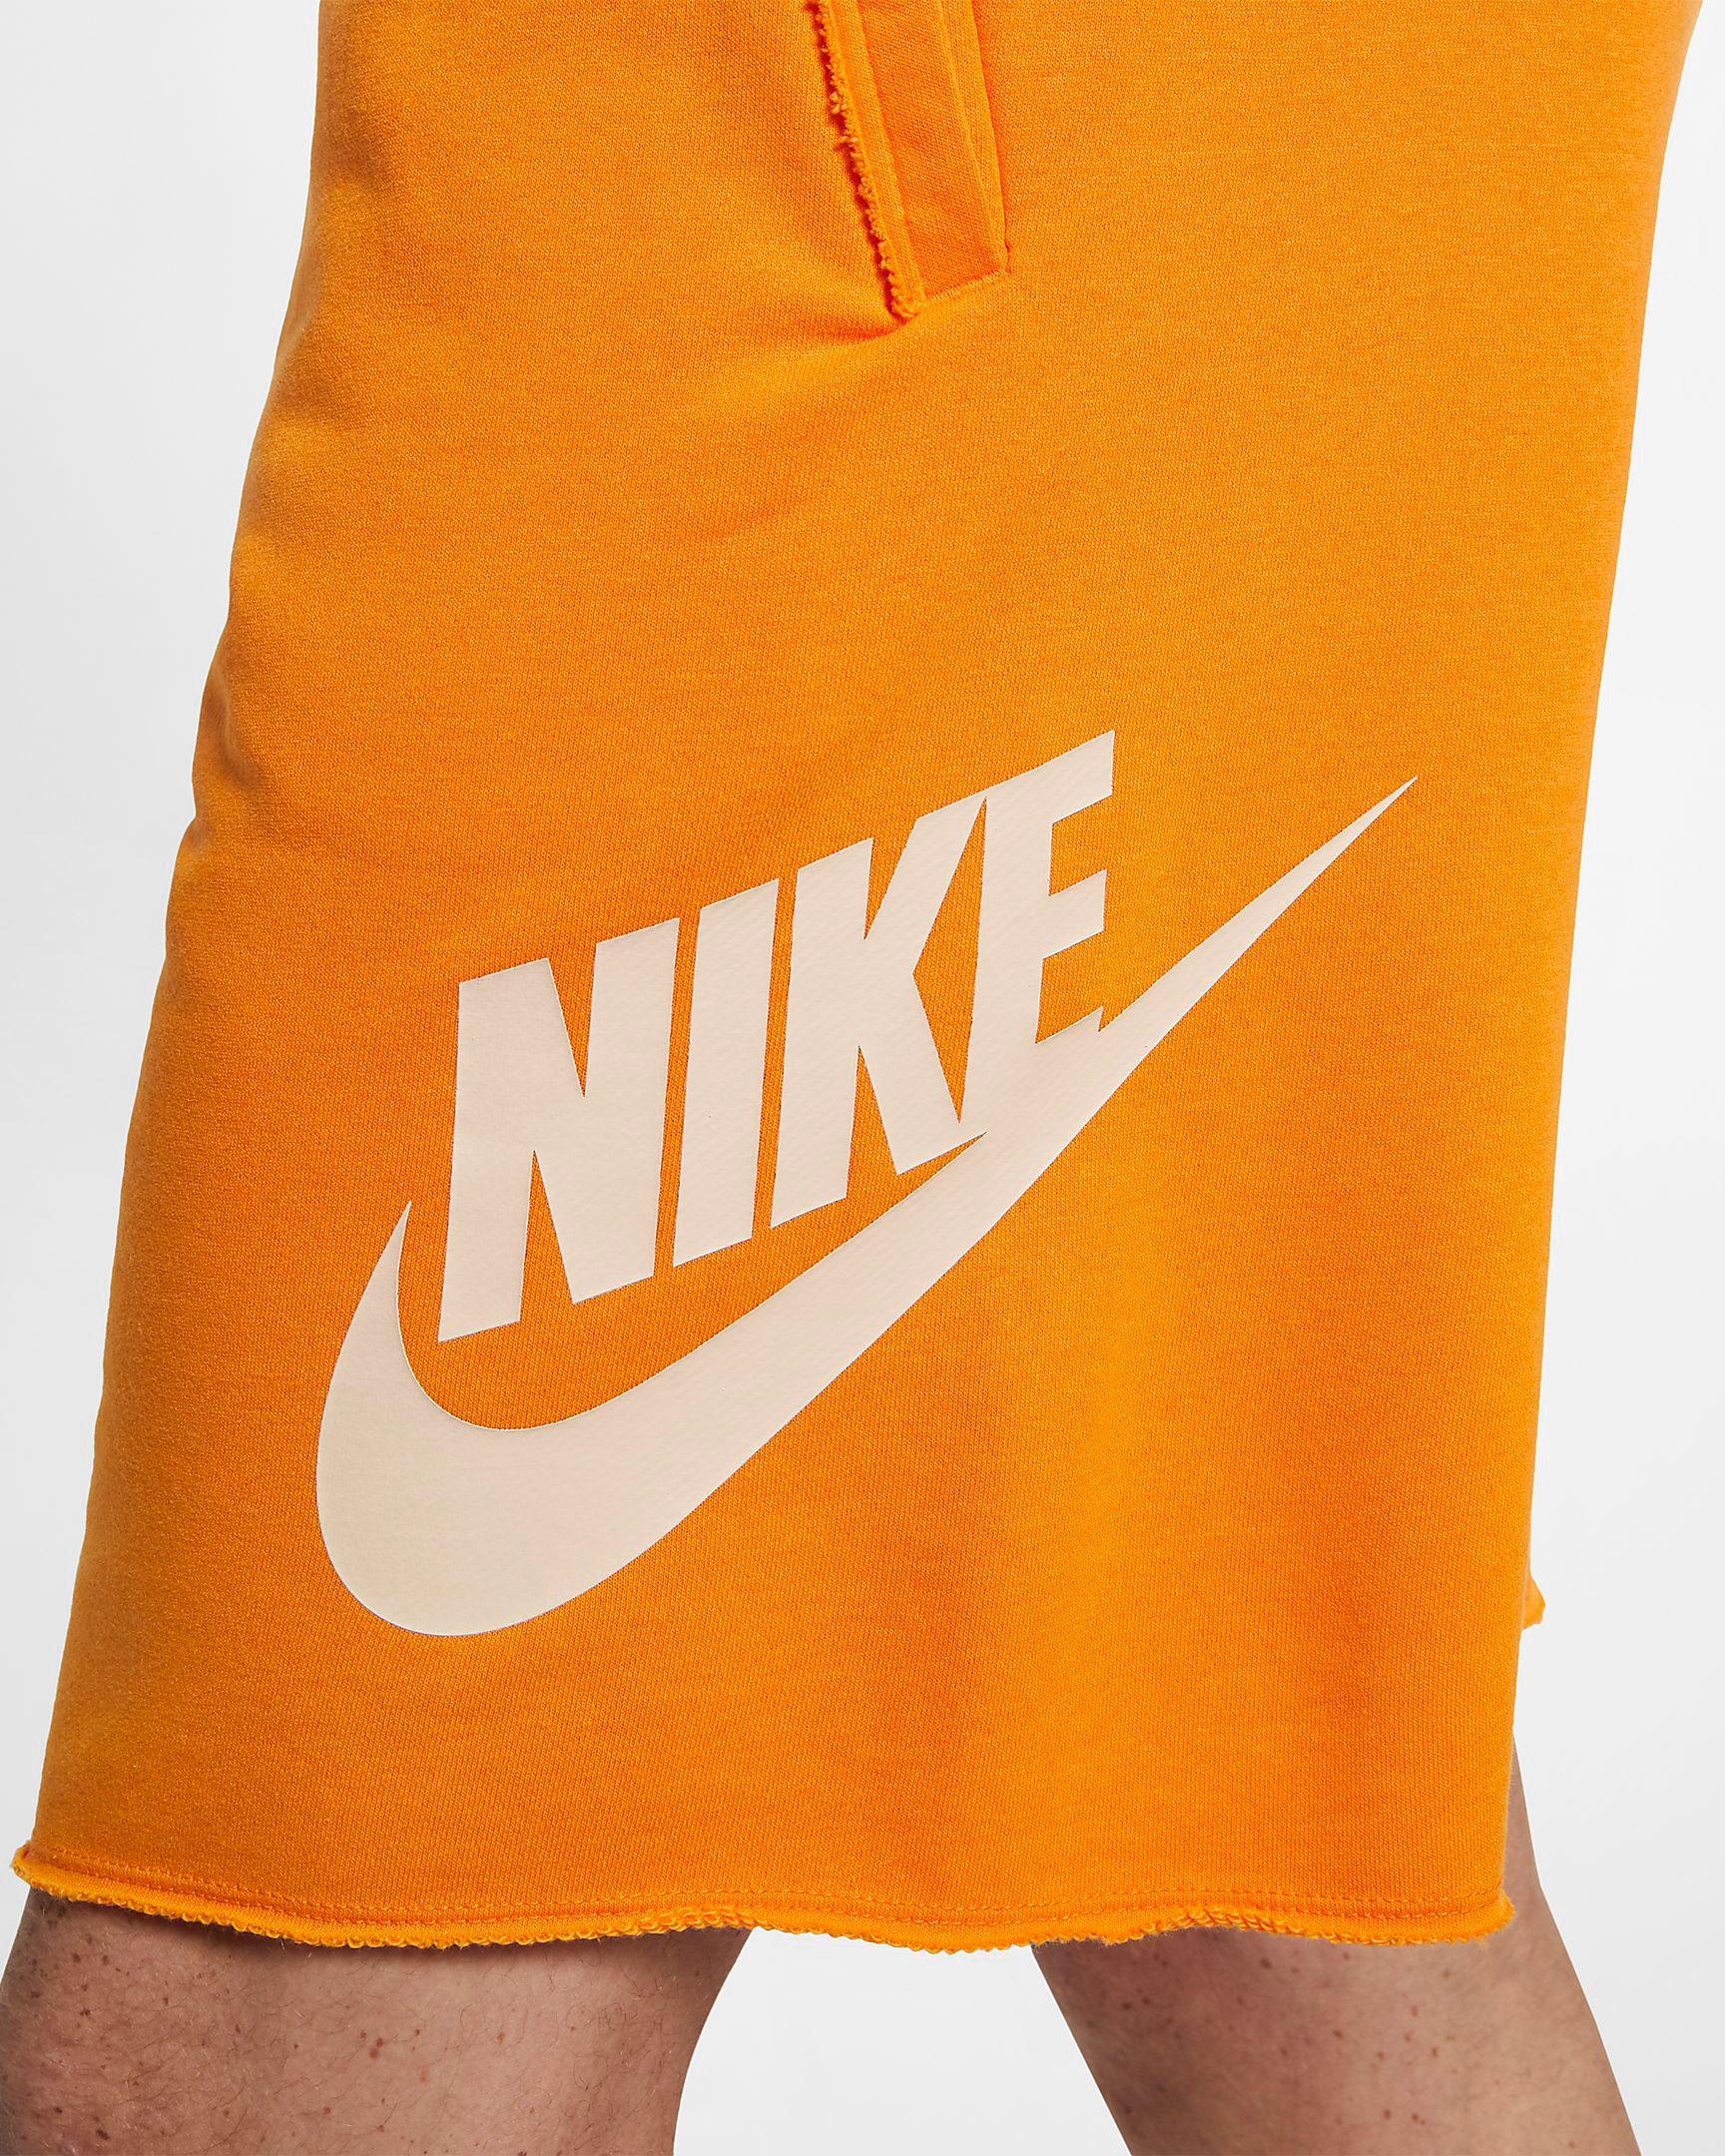 nike shorts all colors